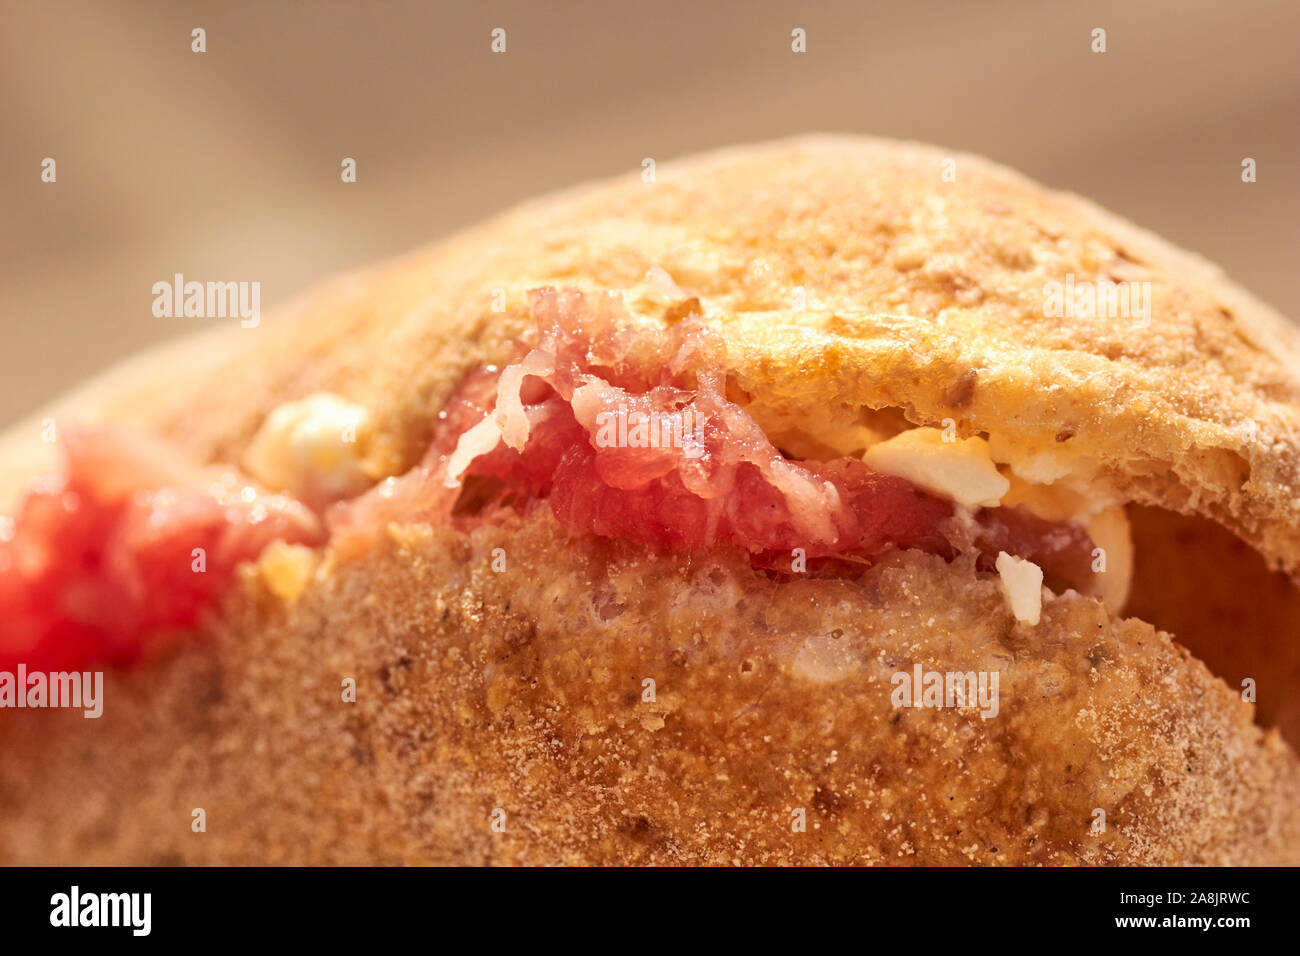 A sandwich of minced raw veal from a food truck in Bra, Piemonte, Italy Stock Photo